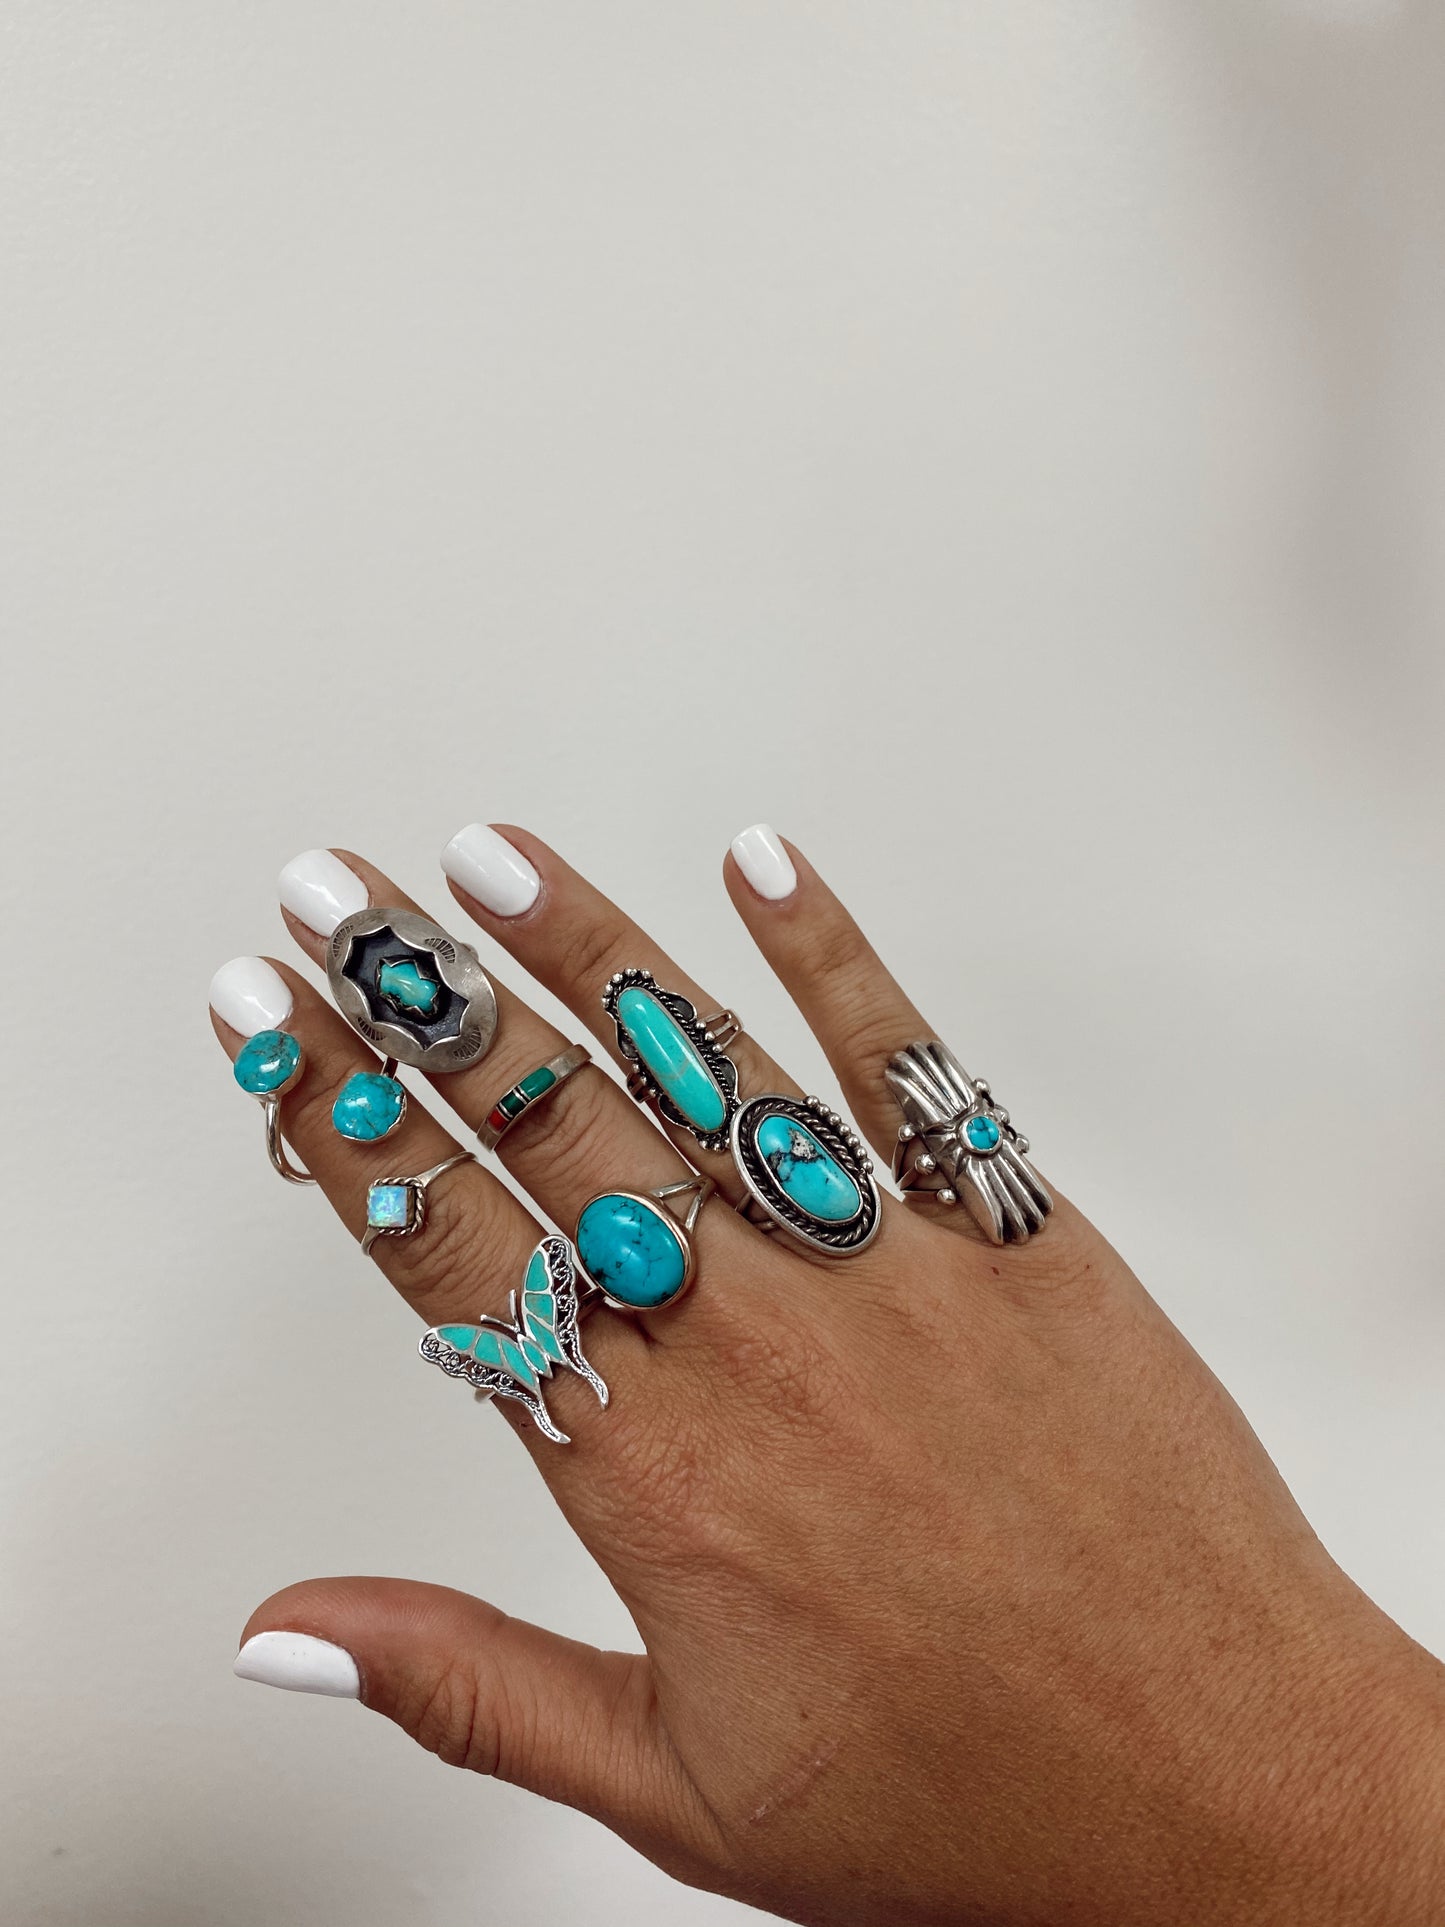 The Turquoise Shield Ring